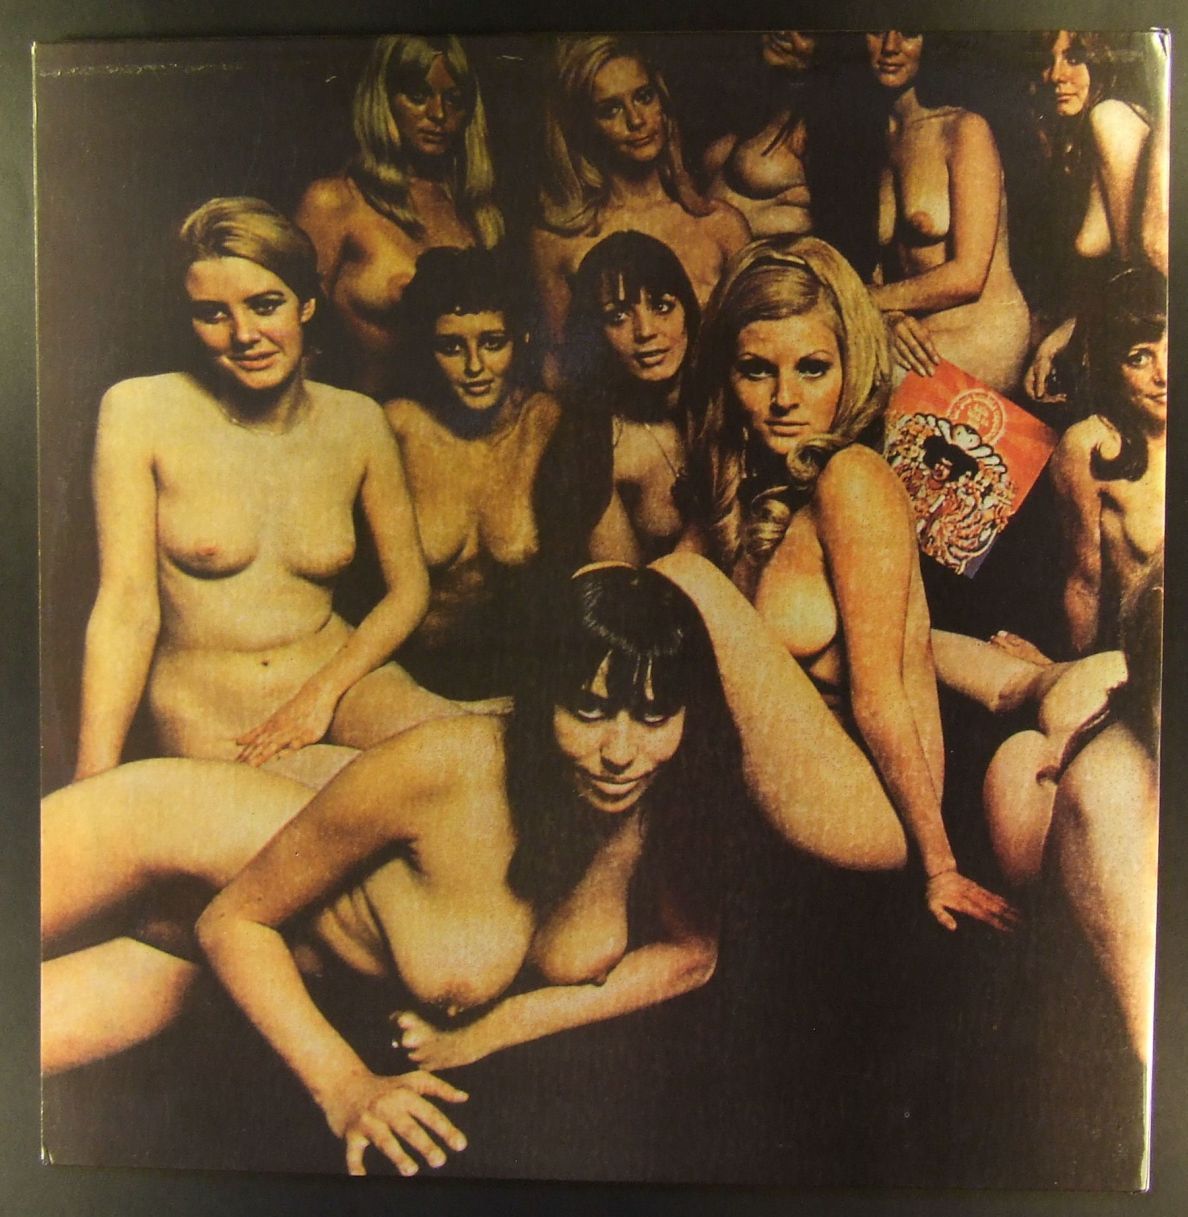 The Jimi Hendrix Experience. Electric Ladyland